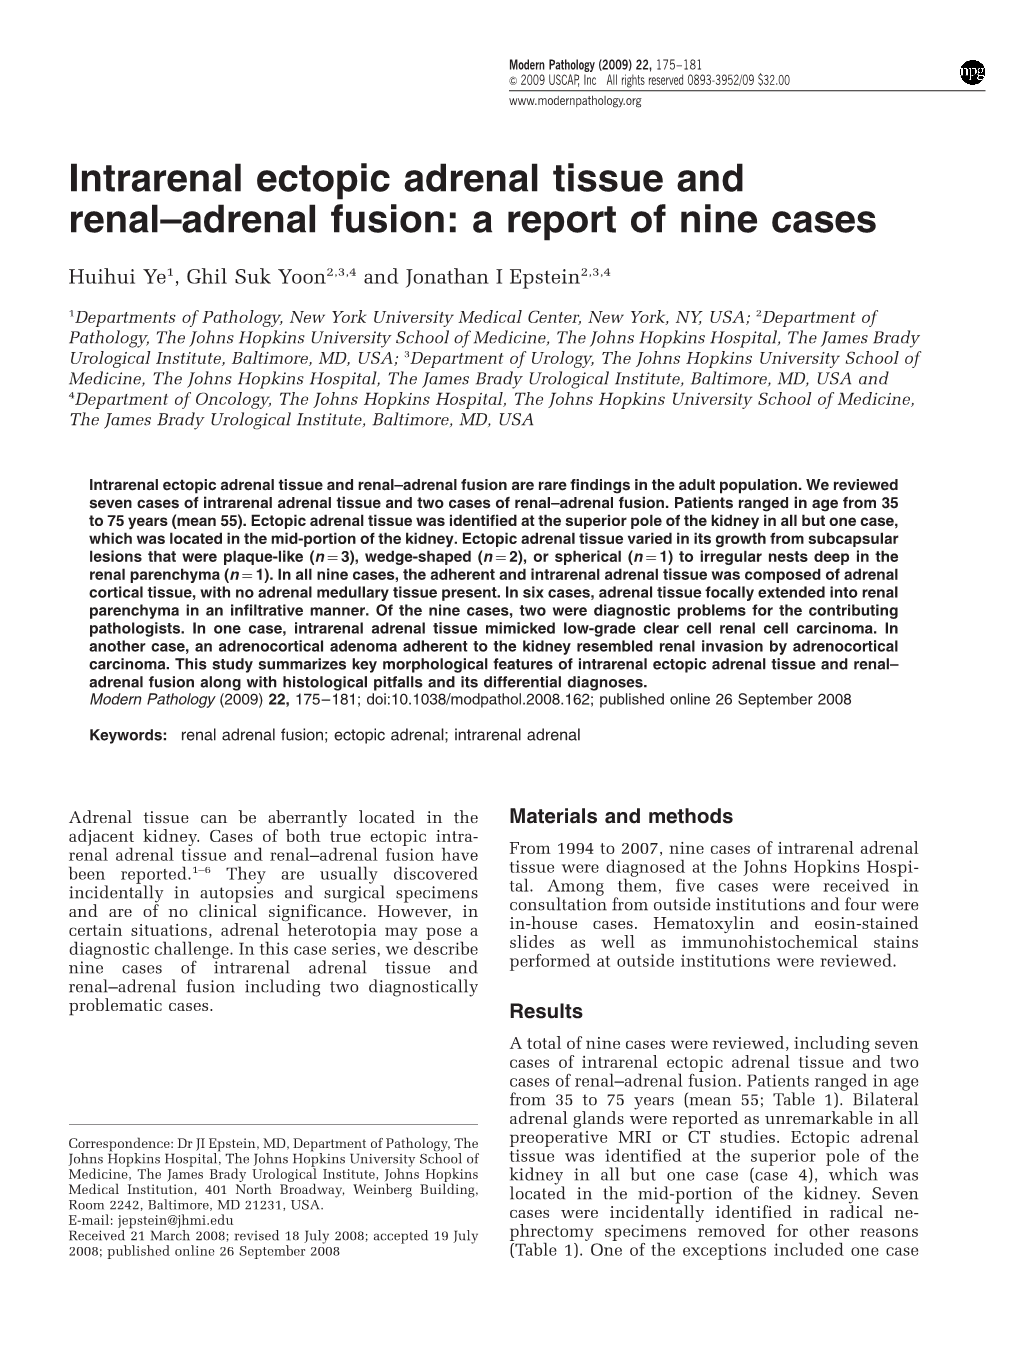 Intrarenal Ectopic Adrenal Tissue and Renal–Adrenal Fusion: a Report of Nine Cases